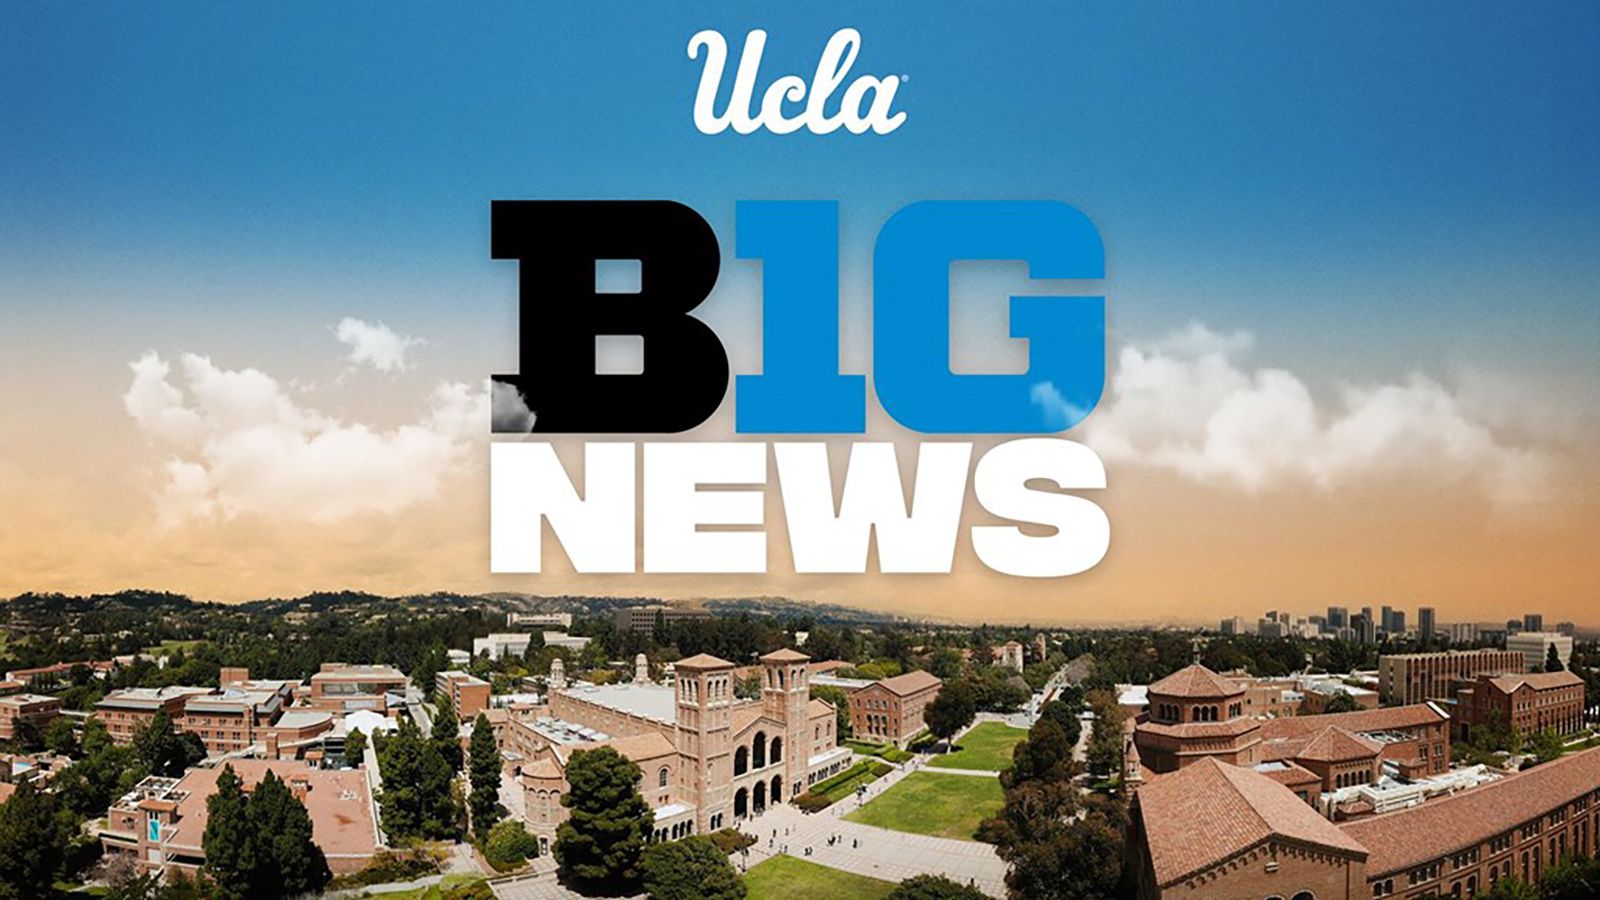 The UCLA and Big News logos over an aerial view of the UCLA campus.